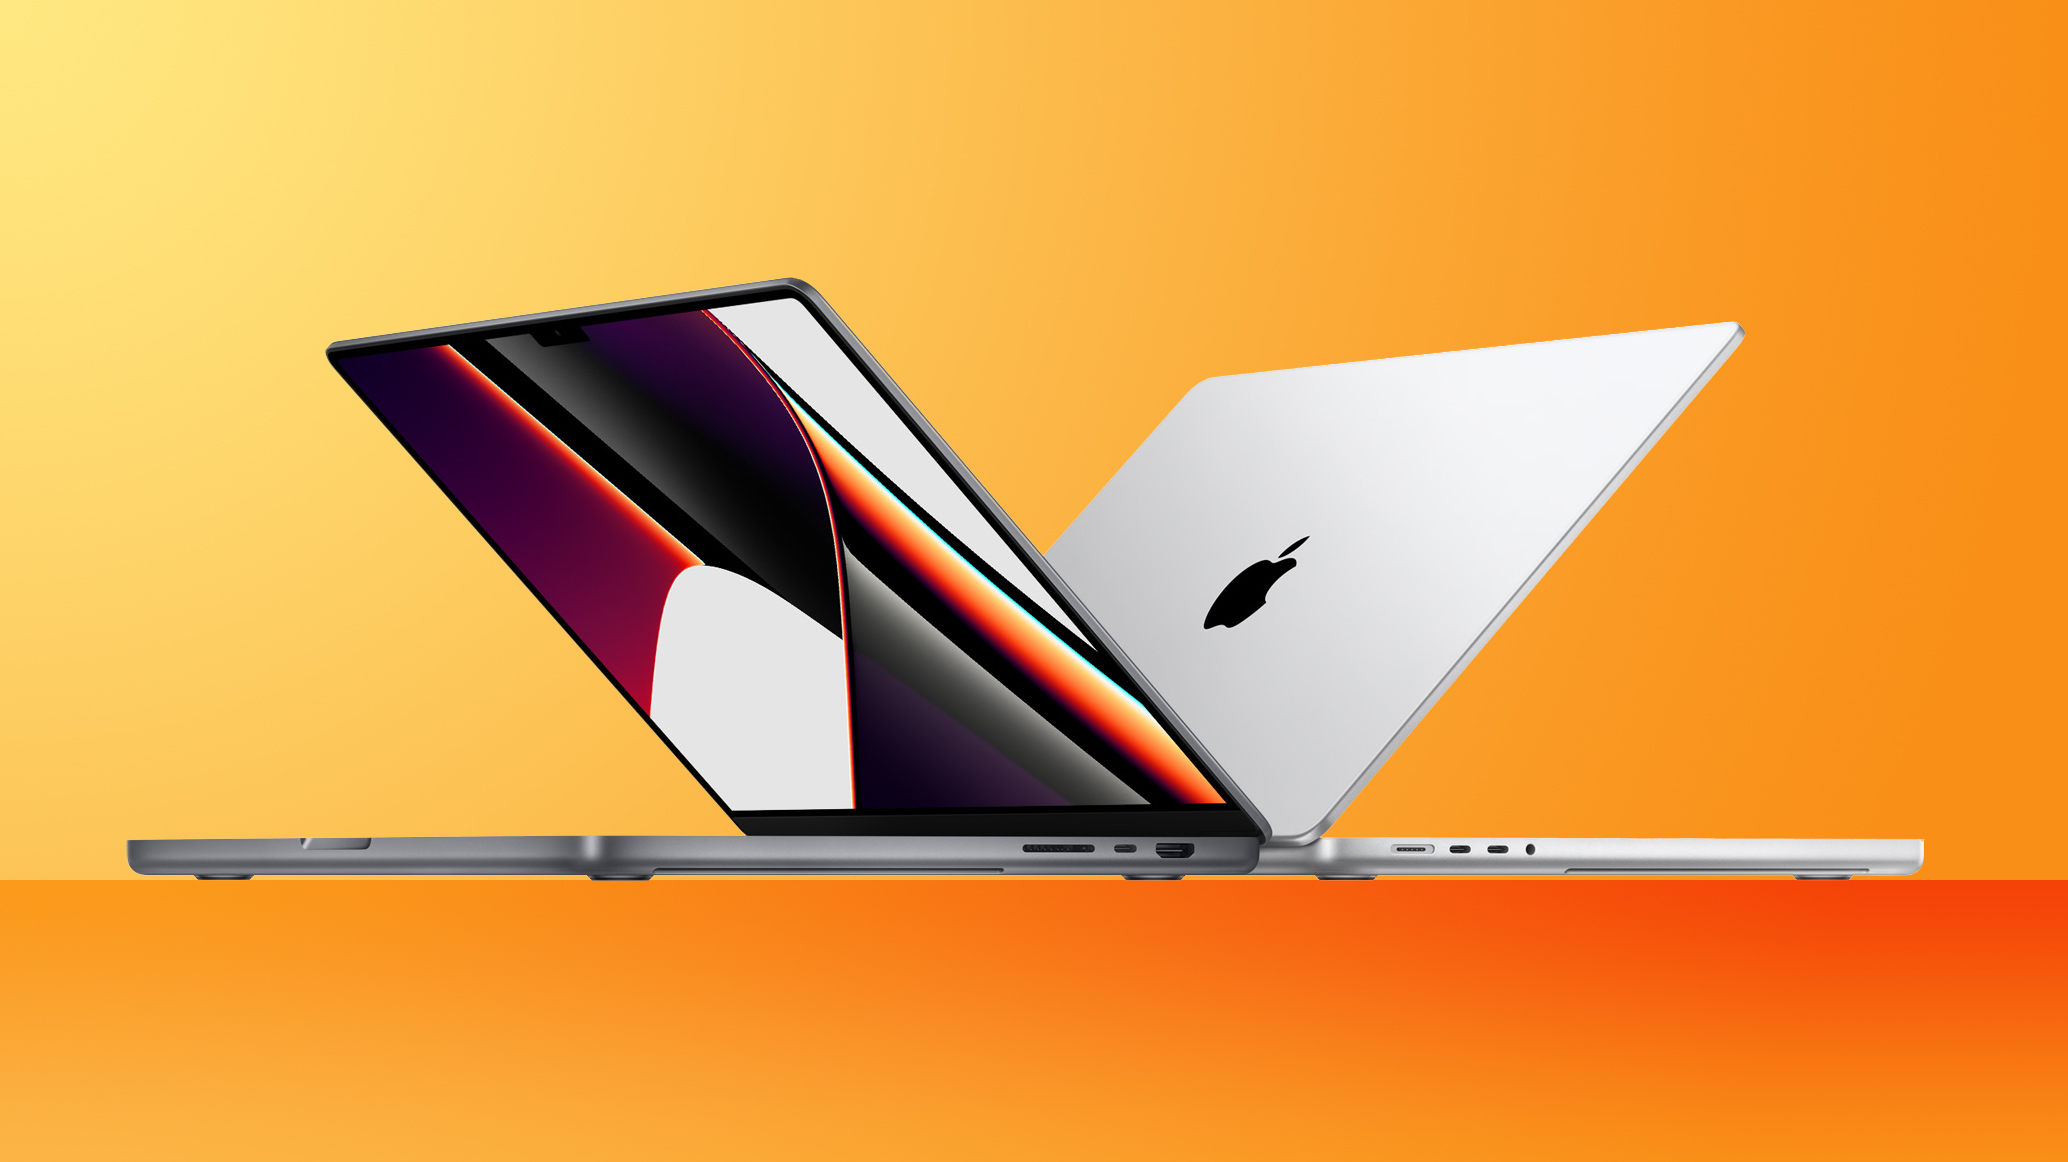 What to Expect From the Next-Generation 14-Inch and 16-Inch MacBook Pro